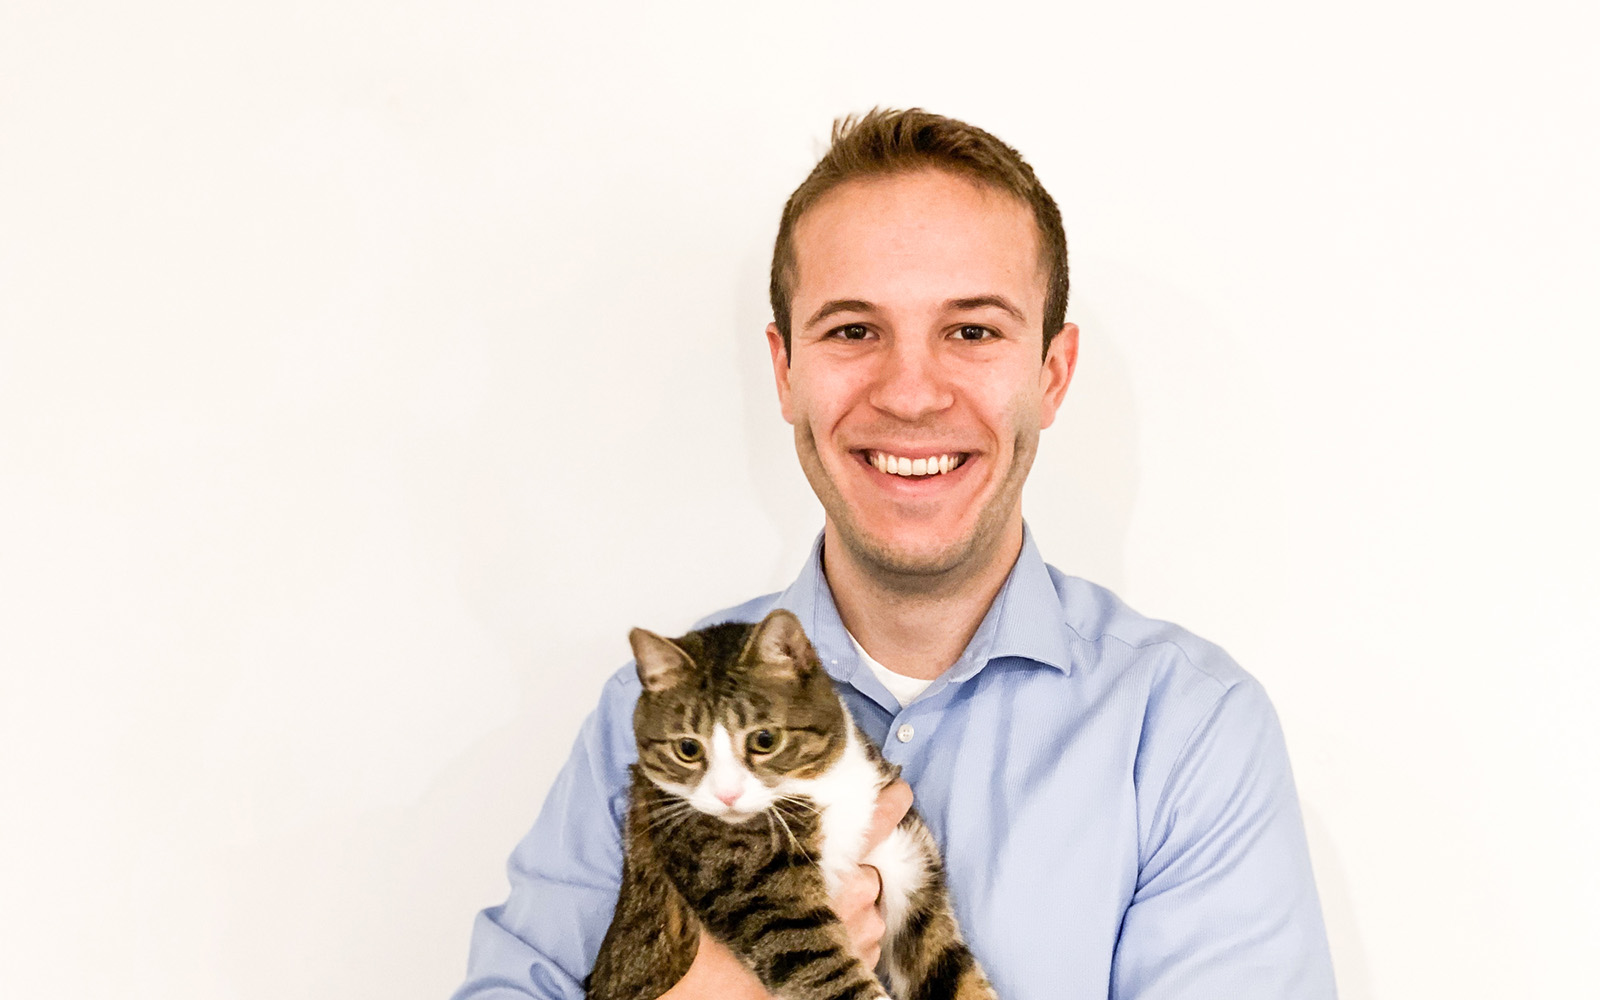 Travis Bloom poses with his cat, Ginny